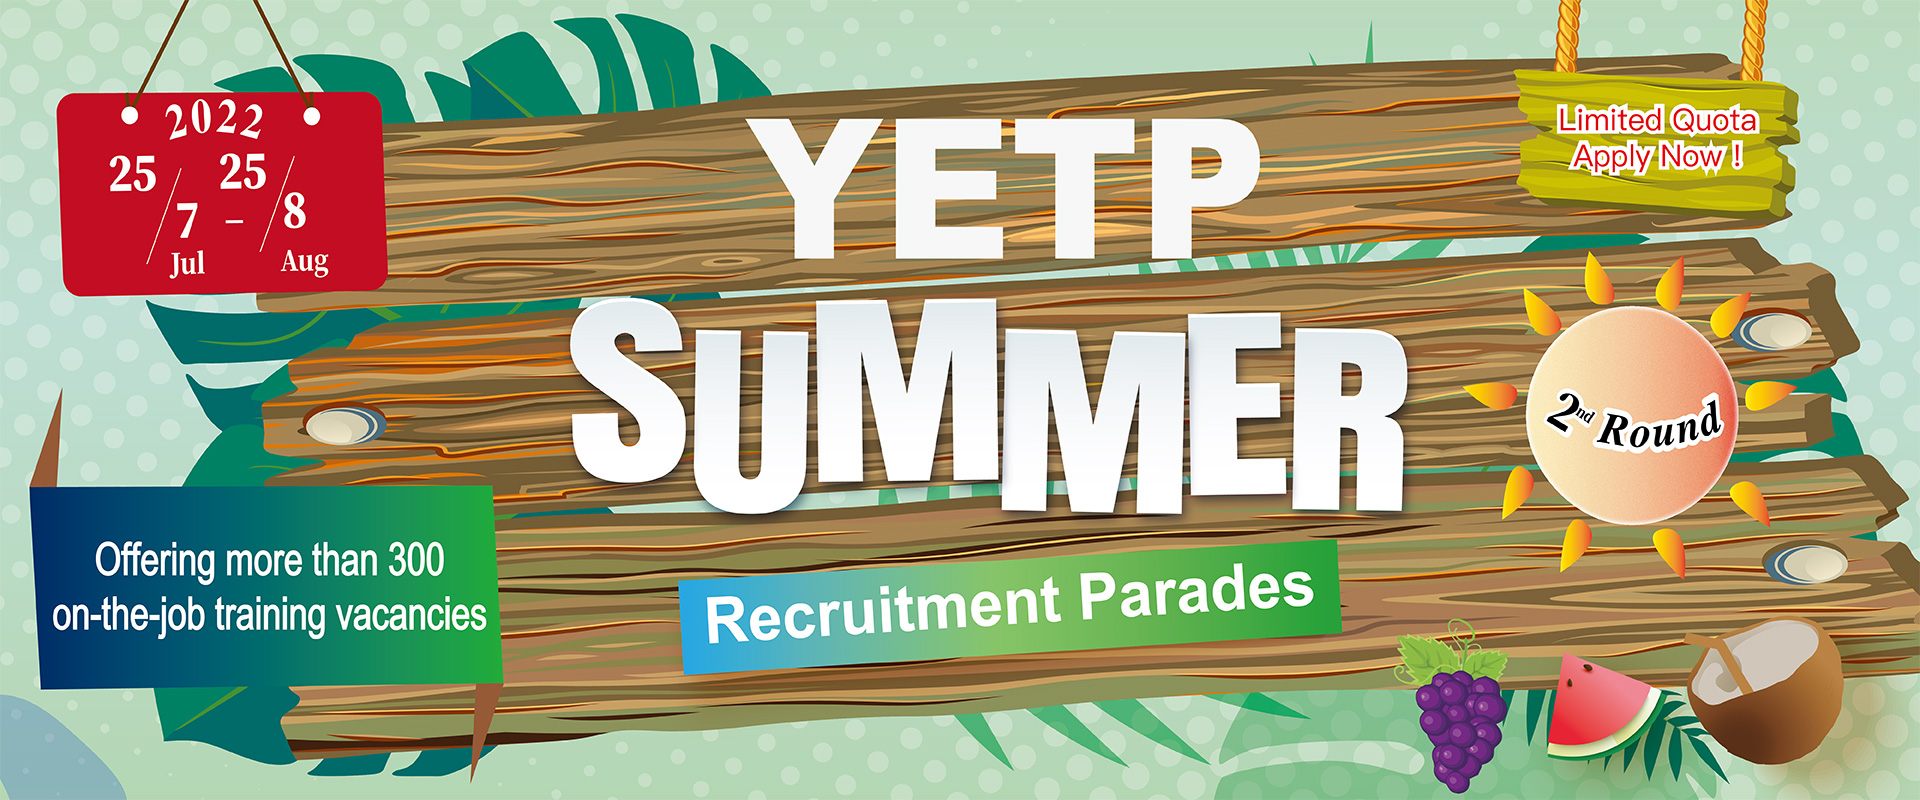 YETP Summer Recruitment Parades (Second Round)(25 July 2022 to 25 August 2022)